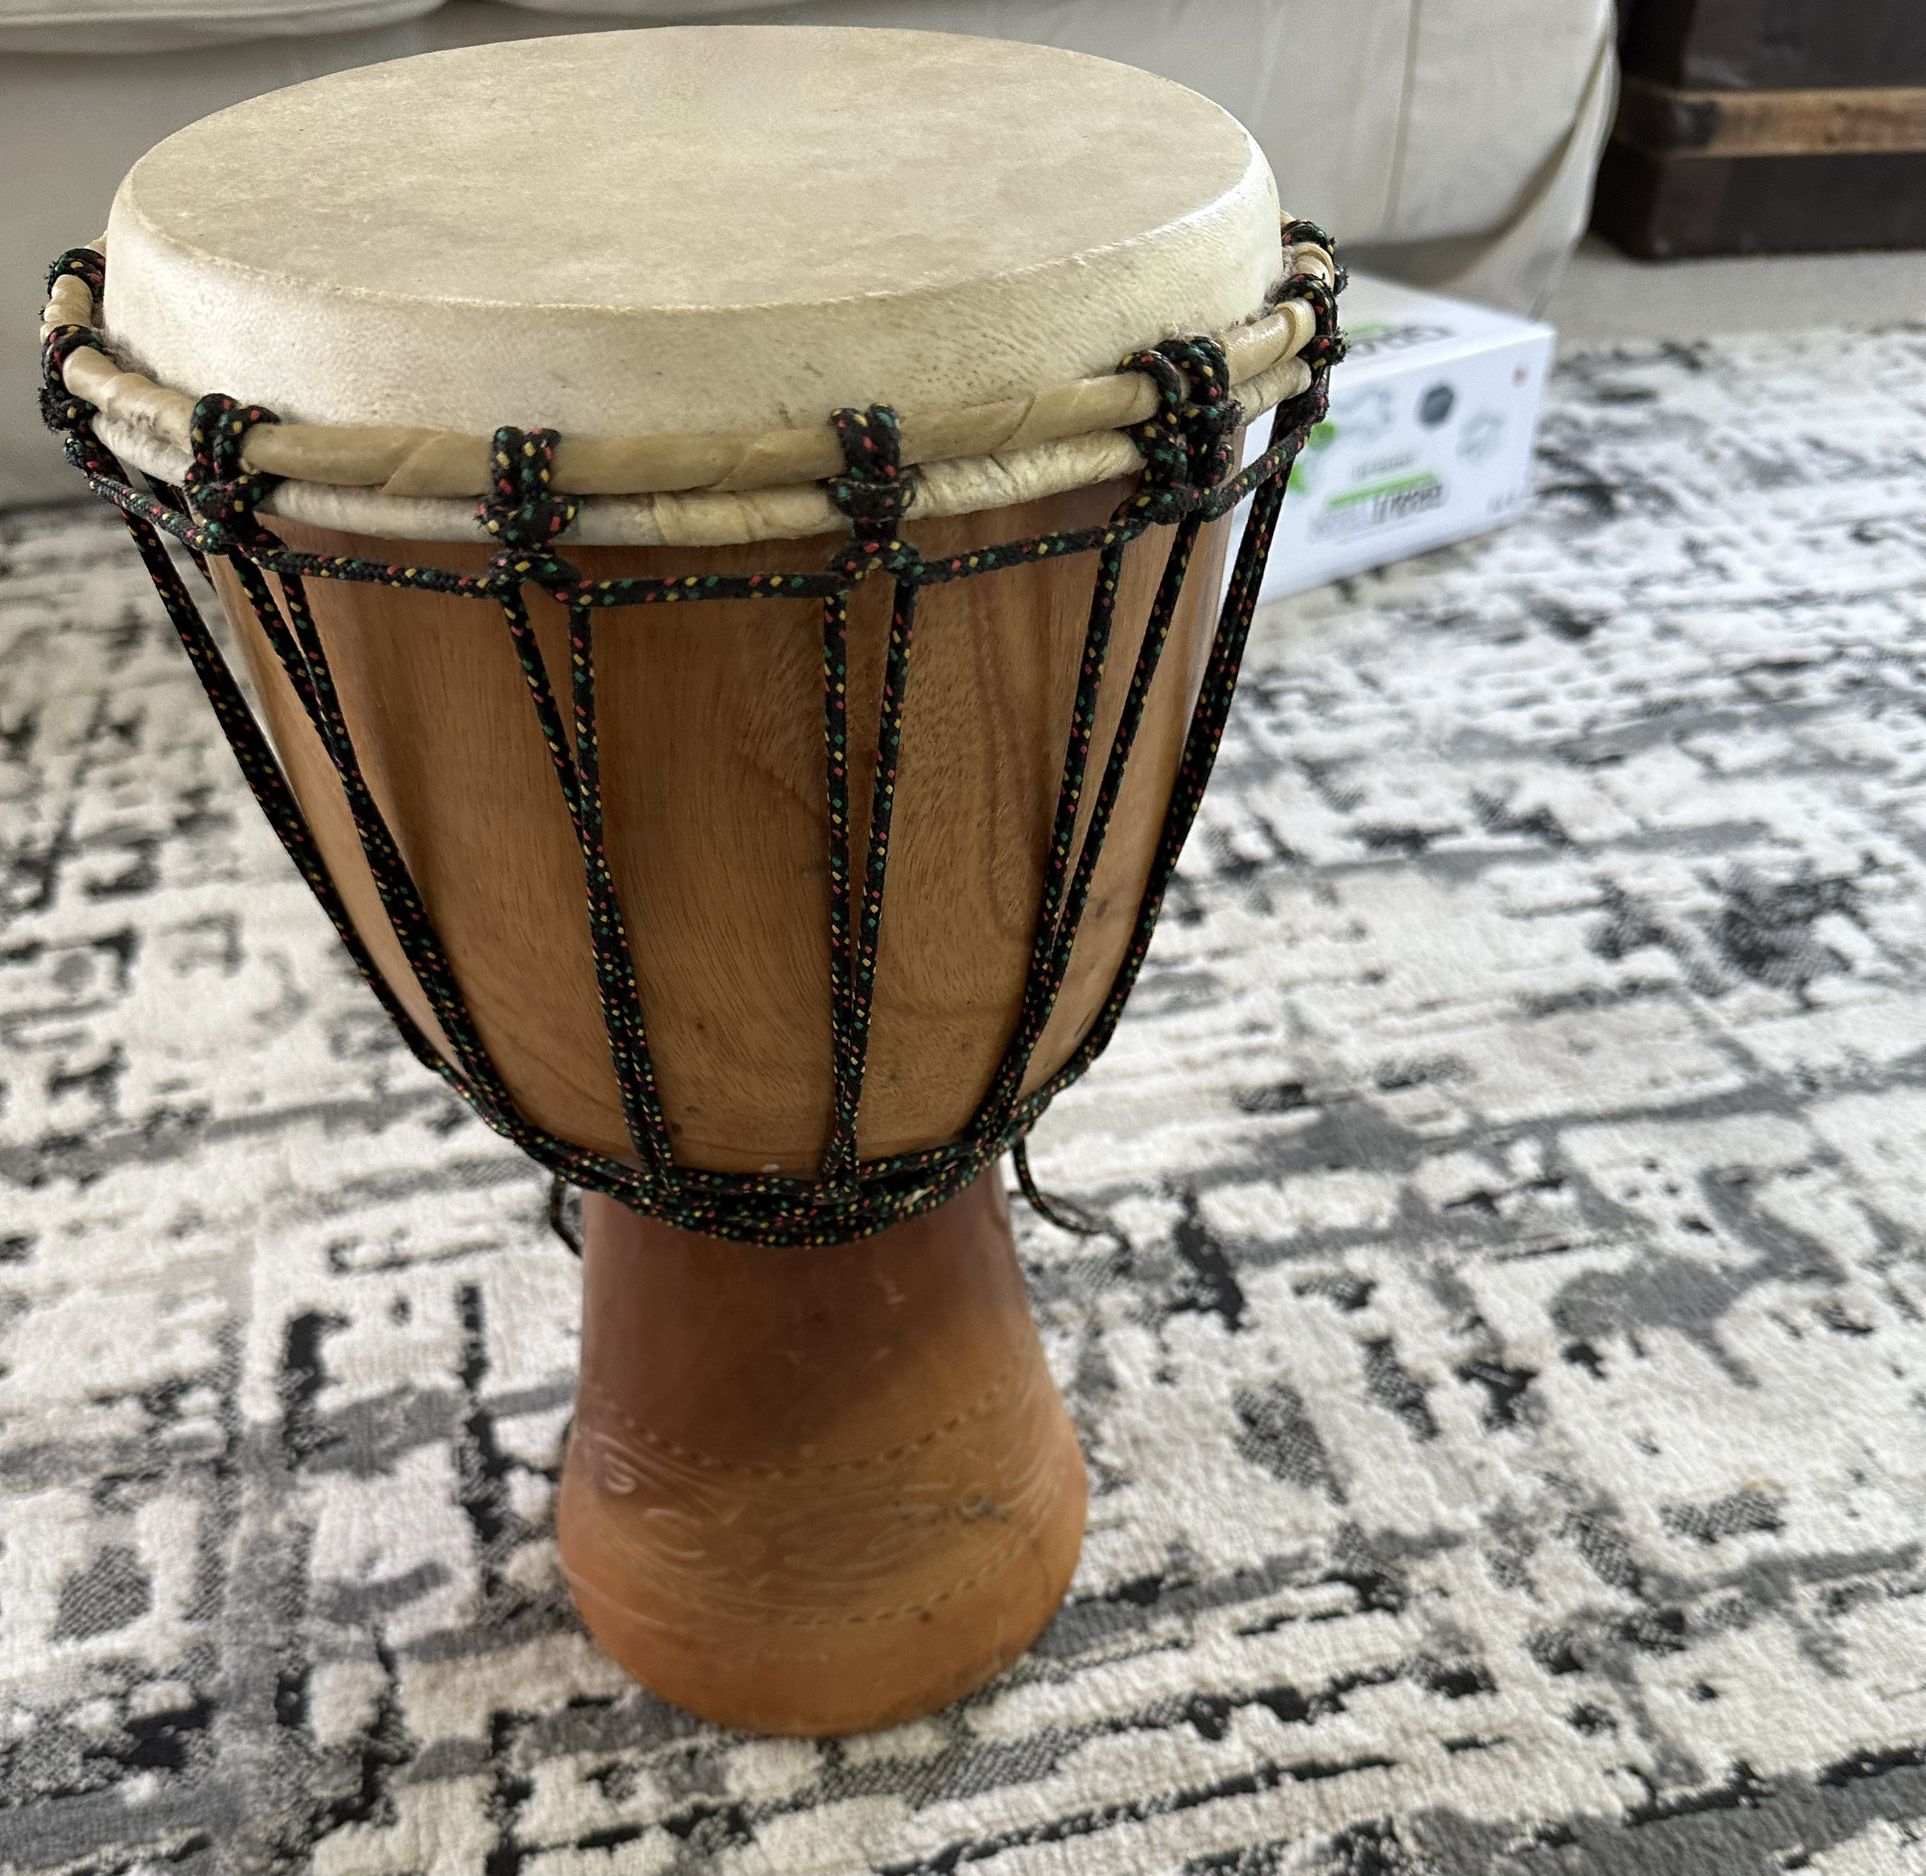 Authentic Djembe Drum - Perfect for Drum Circles or Solo Play 